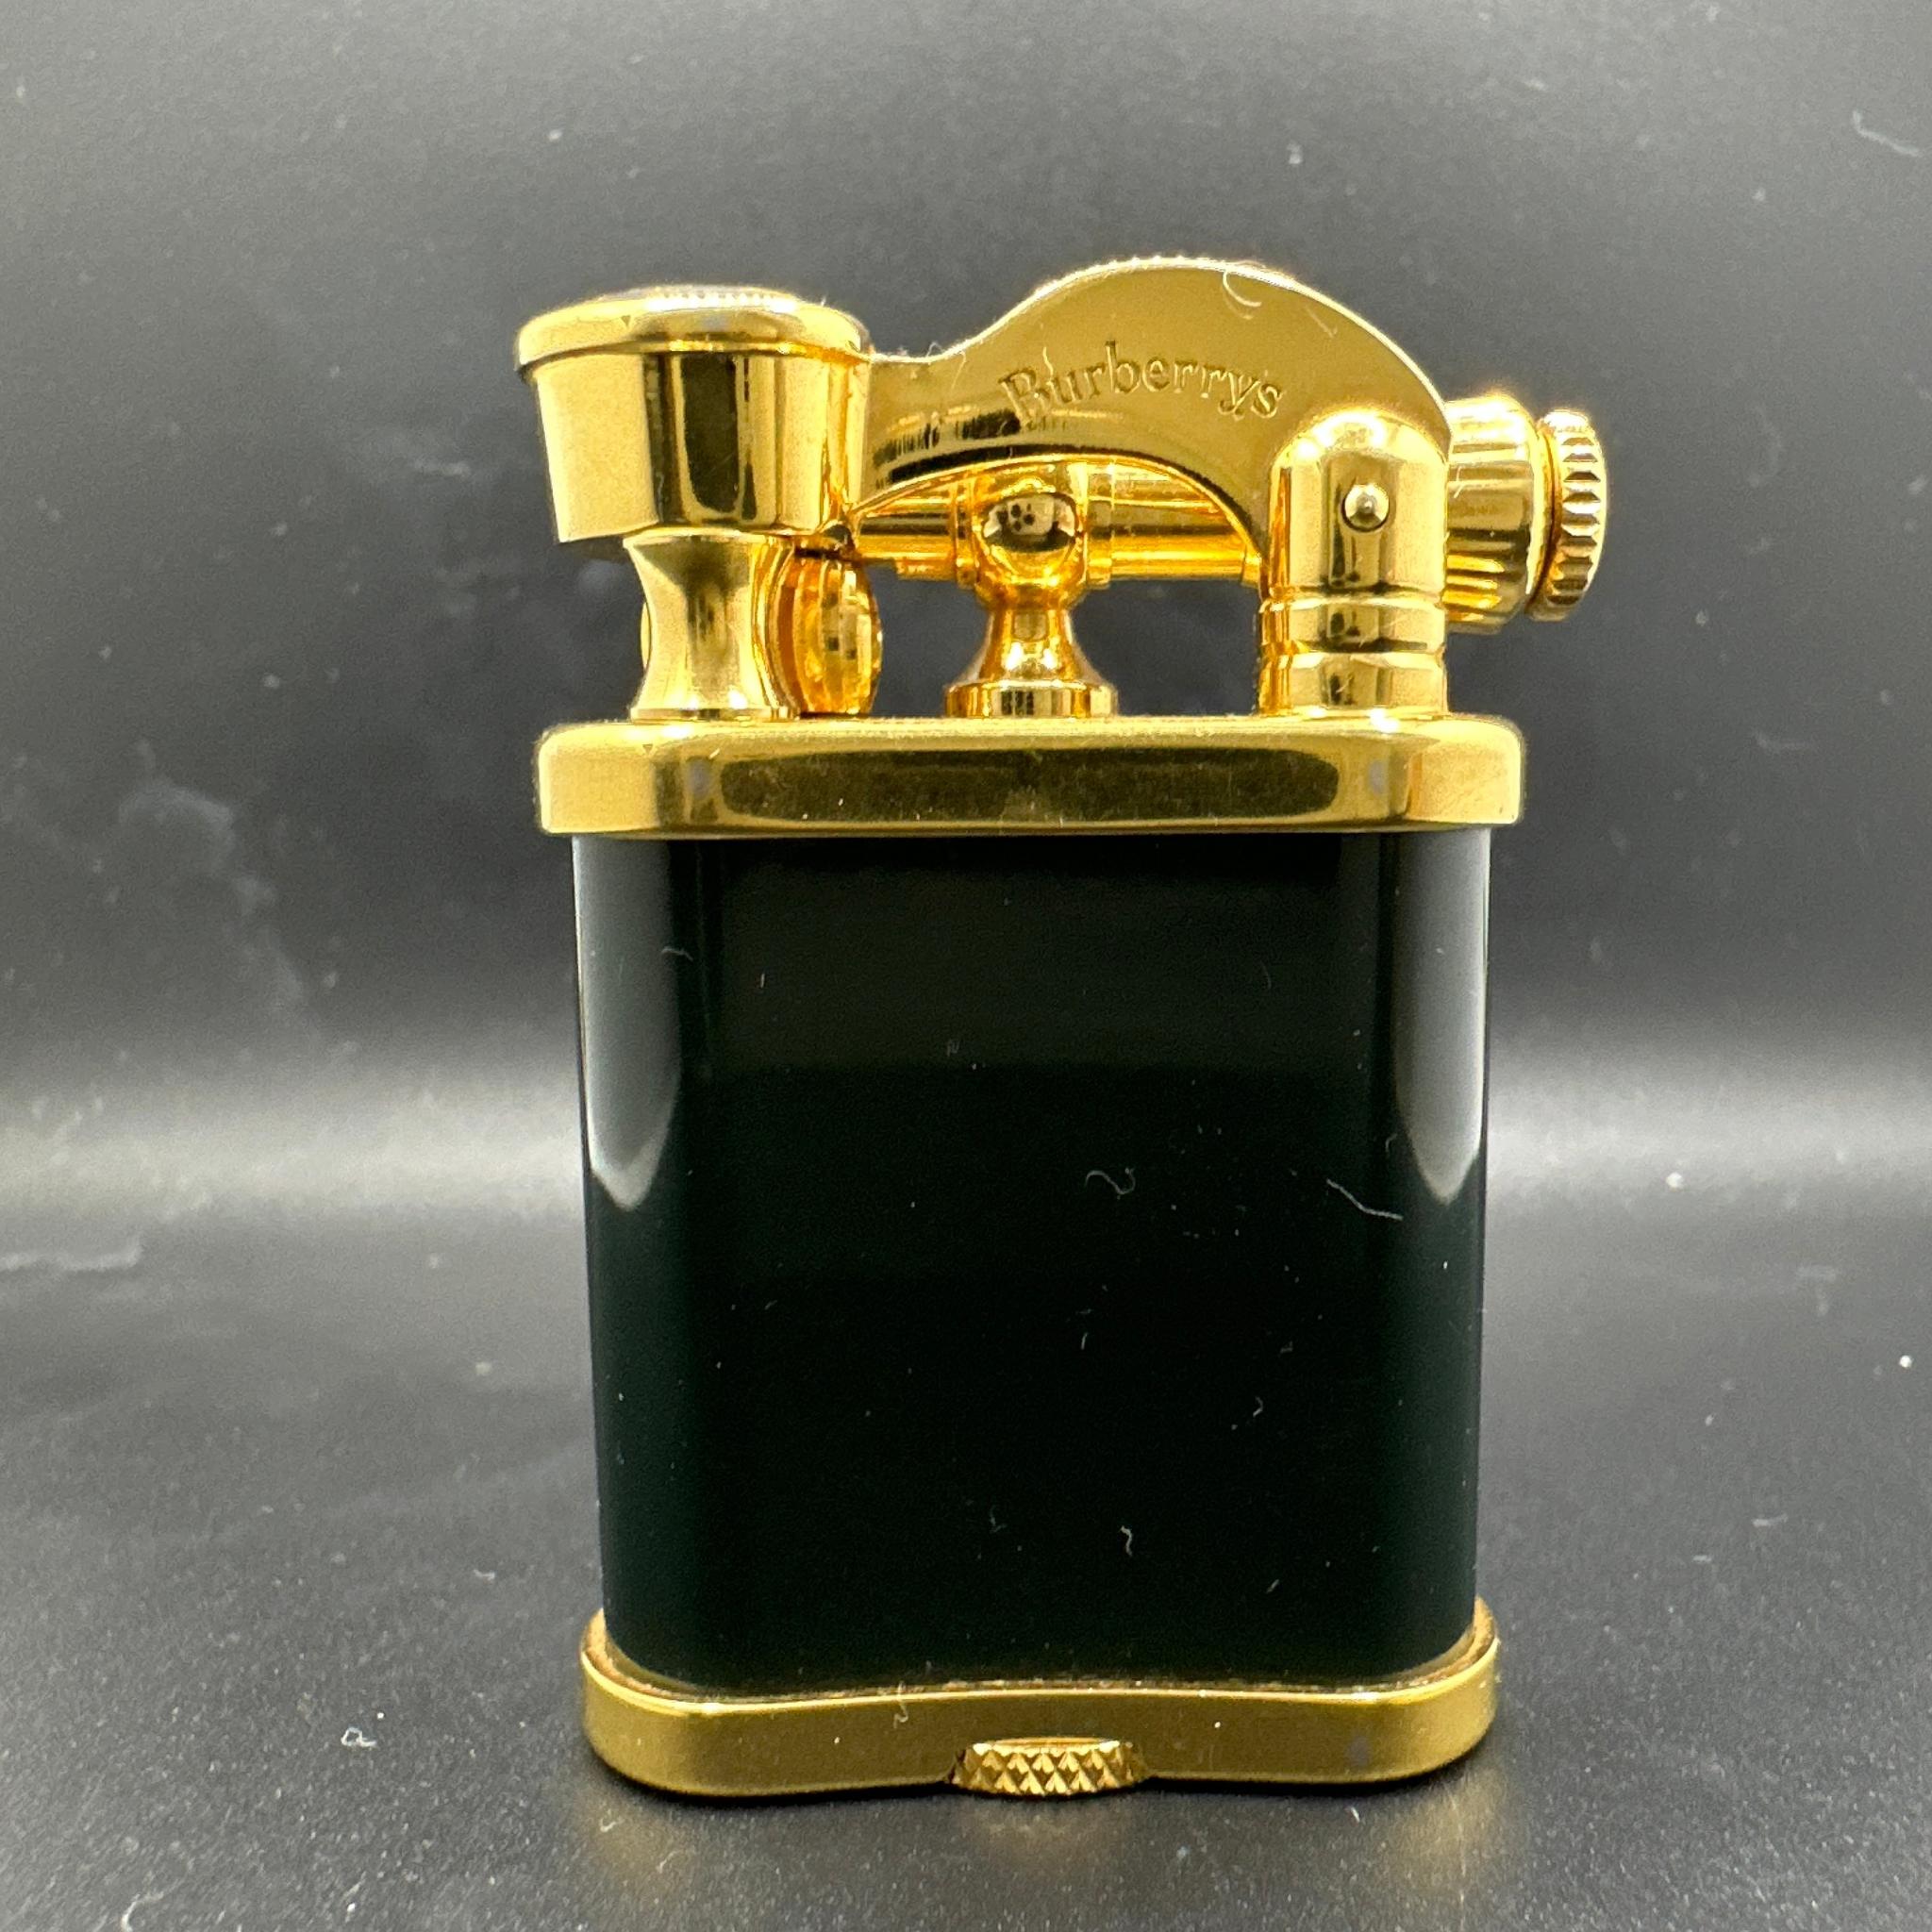 Burberrys BRITISH dark green enamel gold plated lighter with blue sapphire cabochon.
It is in mint working condition. 
Comes with original Burberry box which is very rare. 
The interior of the box is imperial British blue velvet. 

Burberrys lift